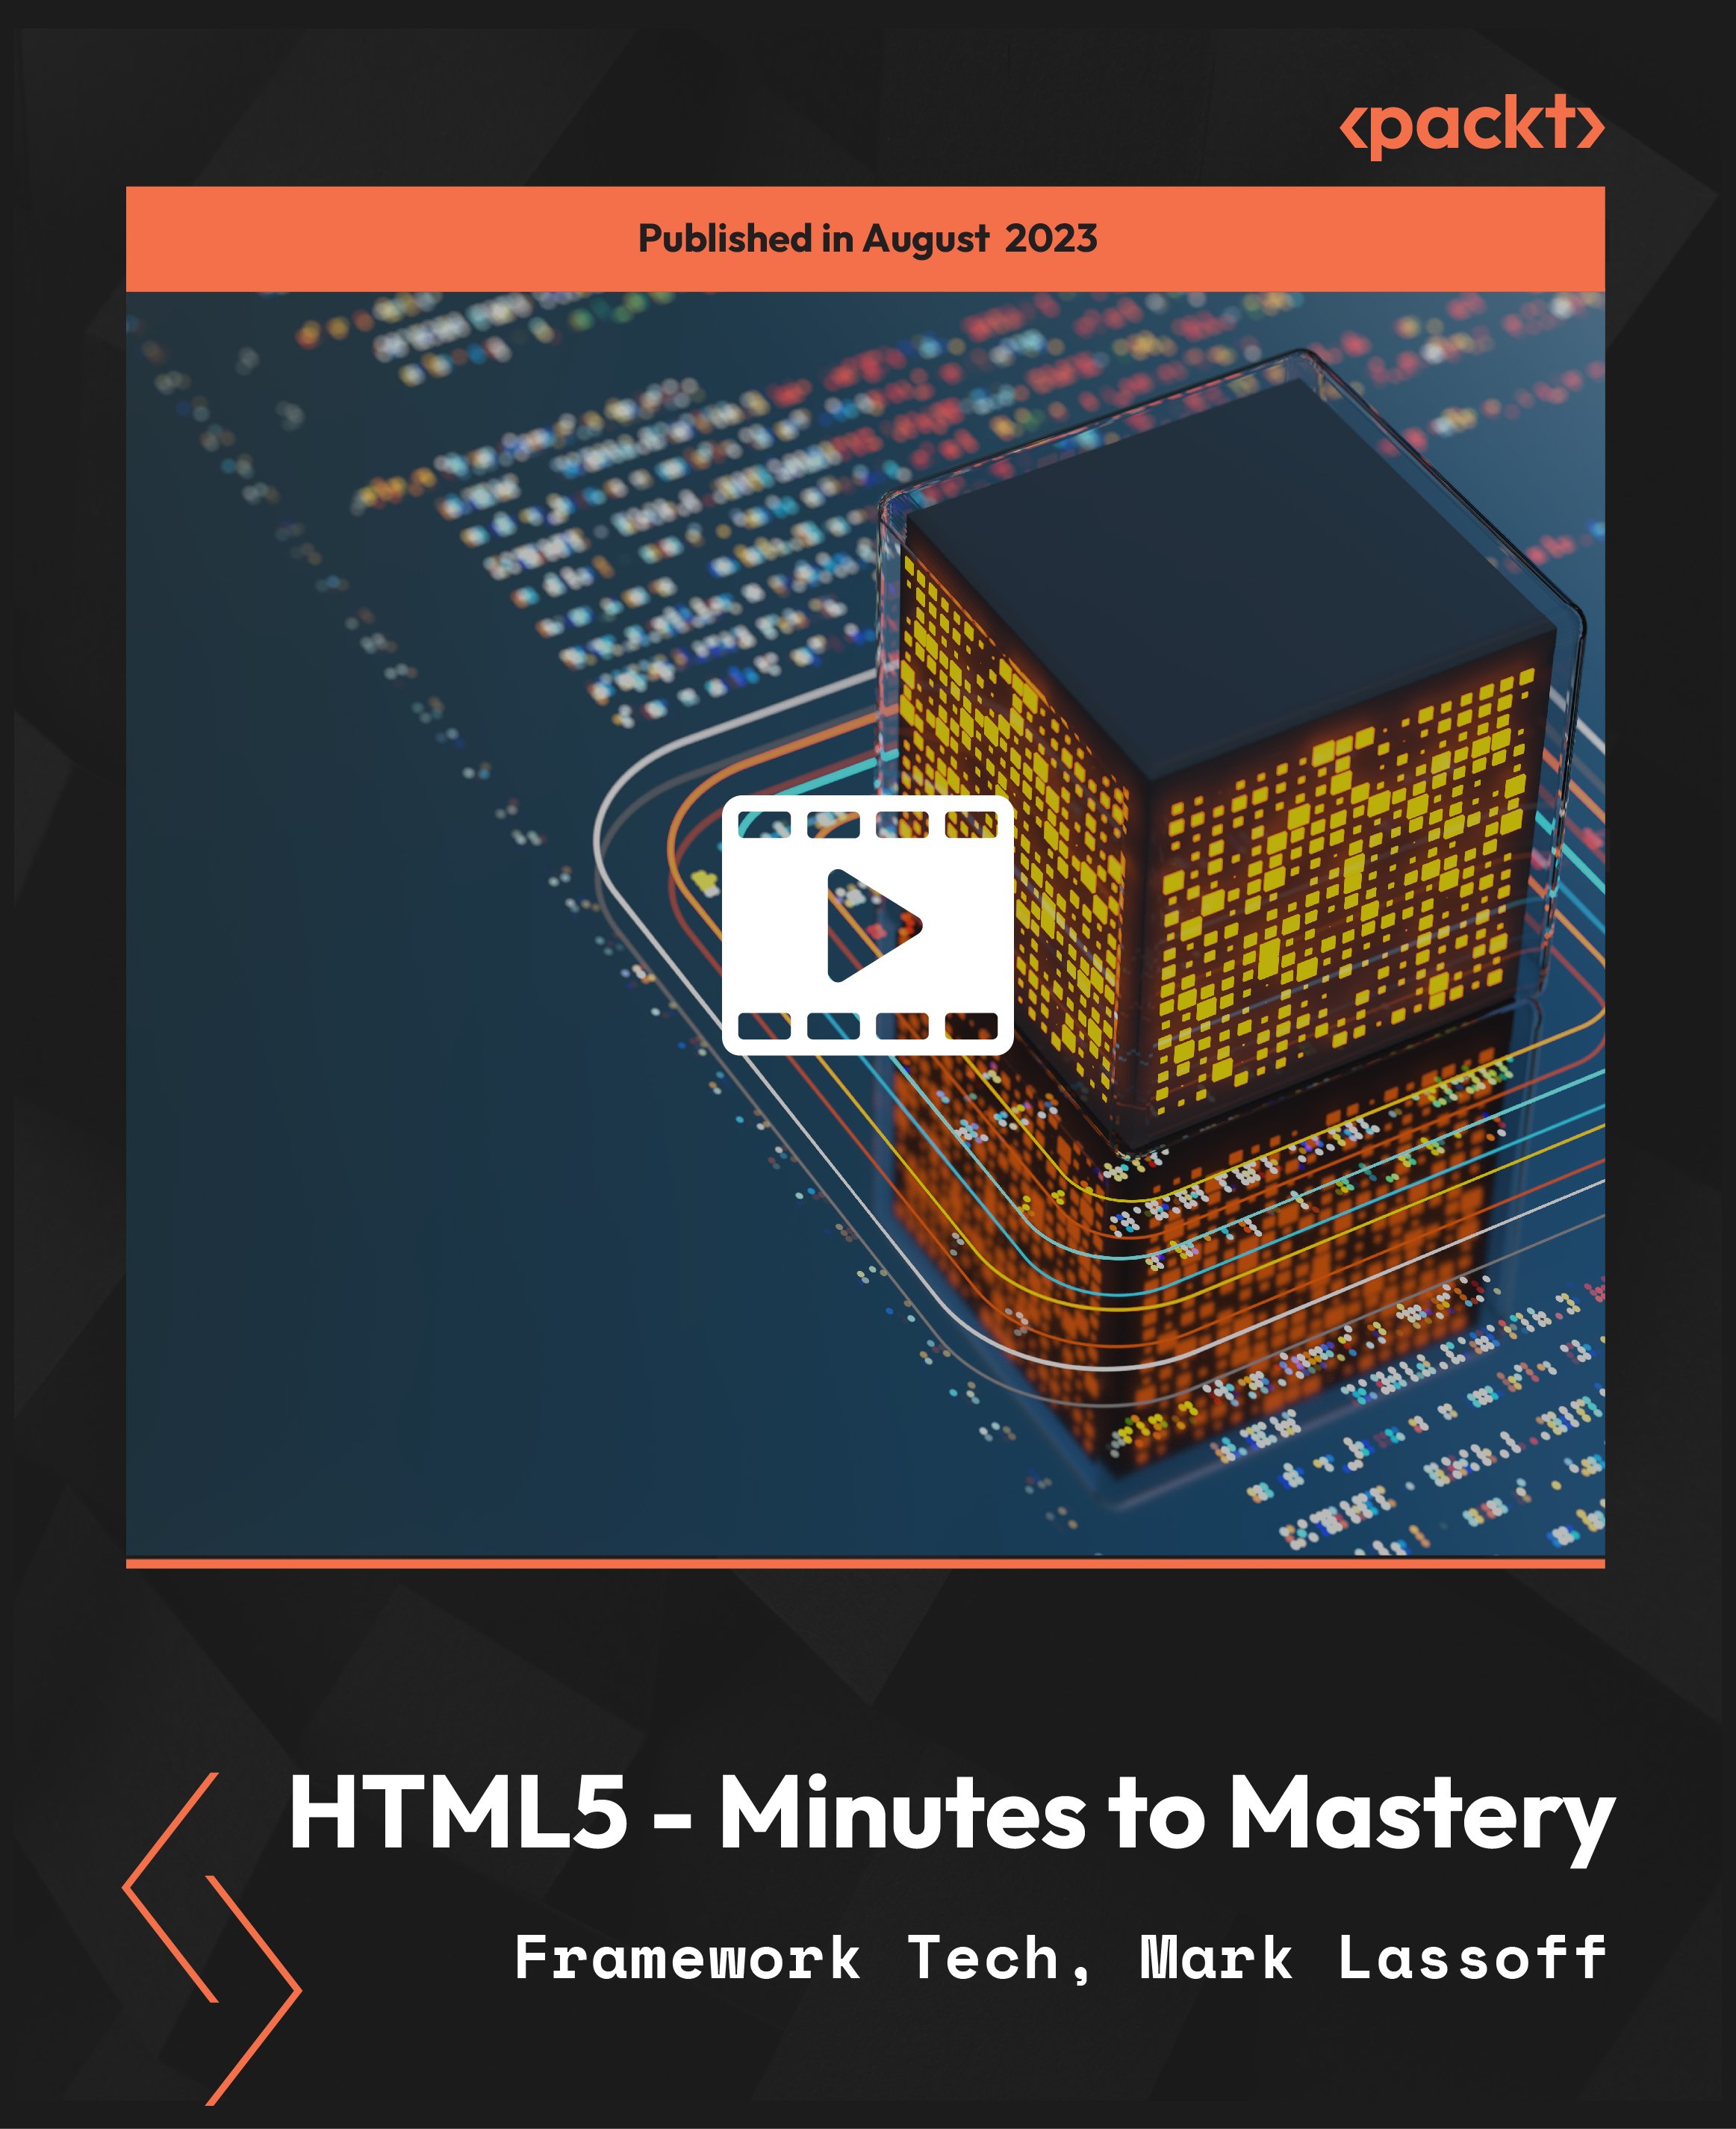 HTML5 - Minutes to Mastery